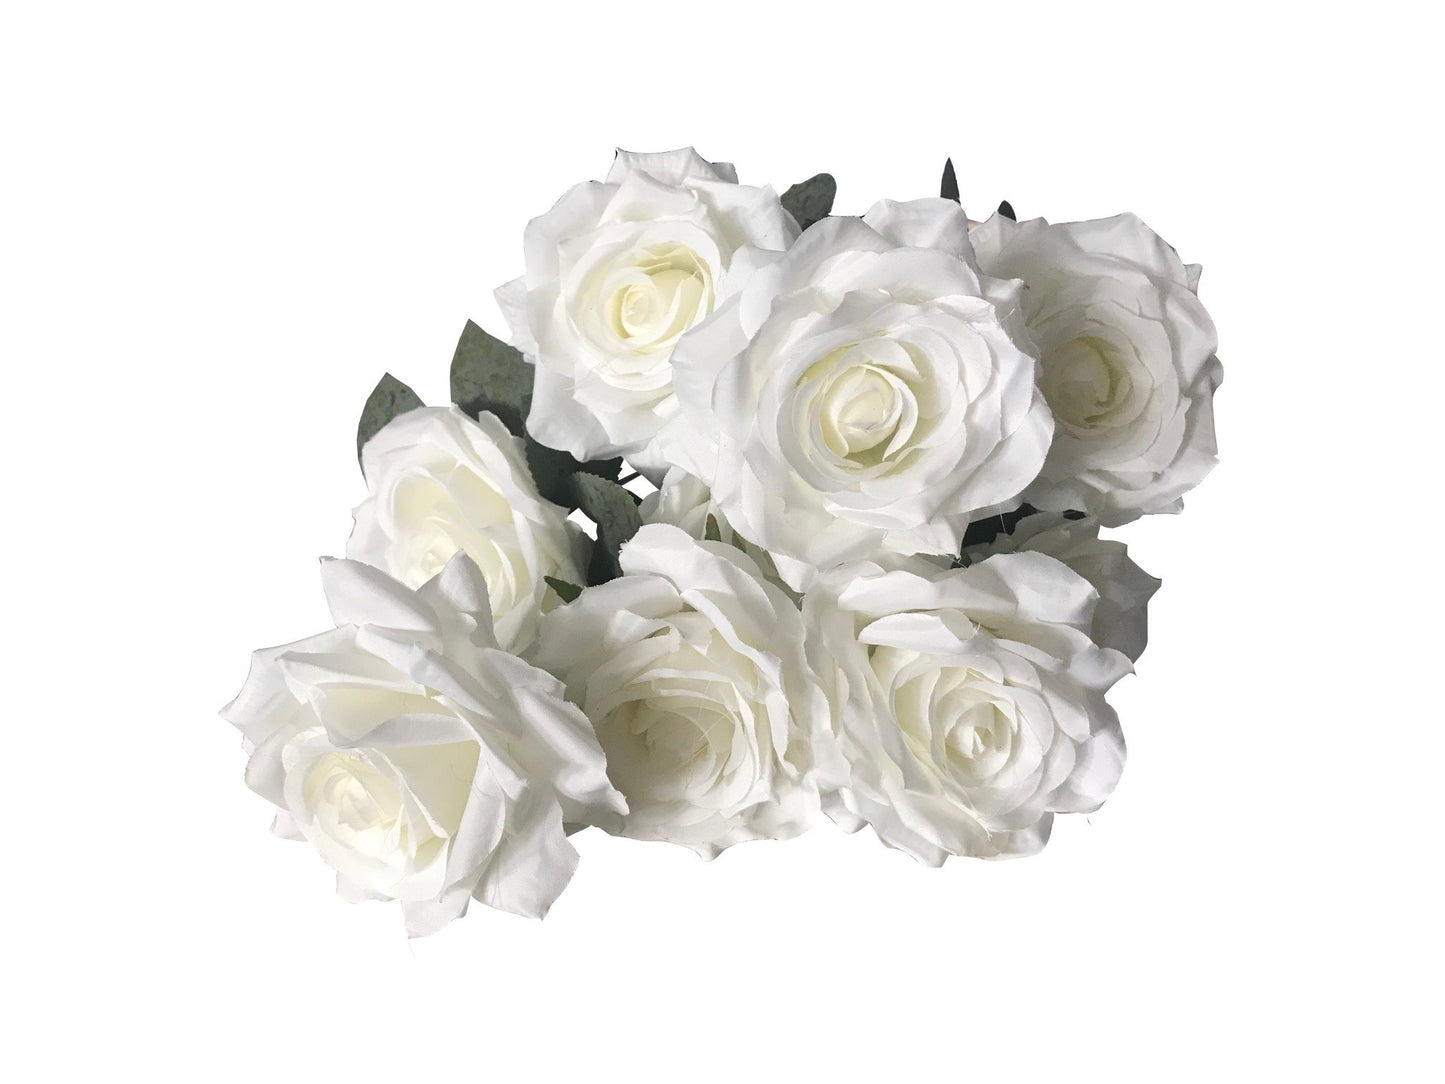    artificial white rose bunch